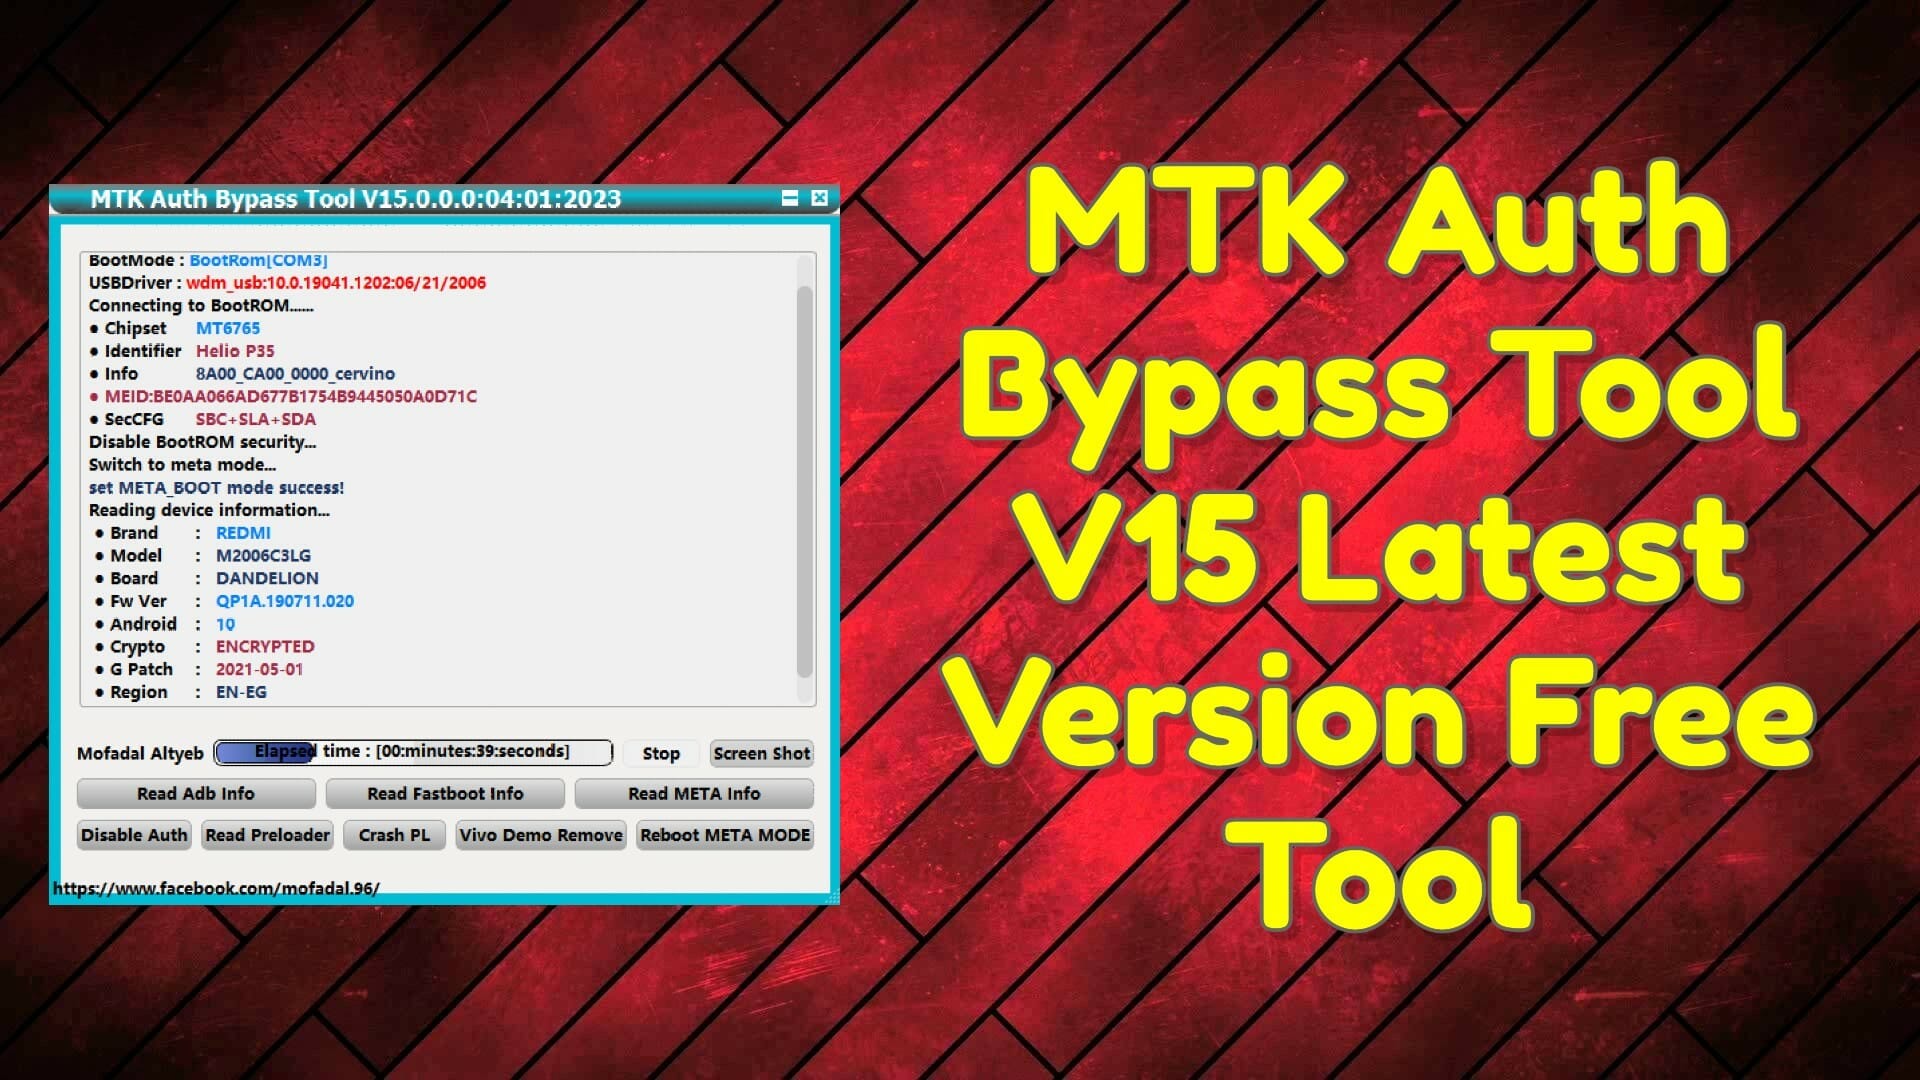 MTK Auth Bypass Tool V15 Latest Version Free Download